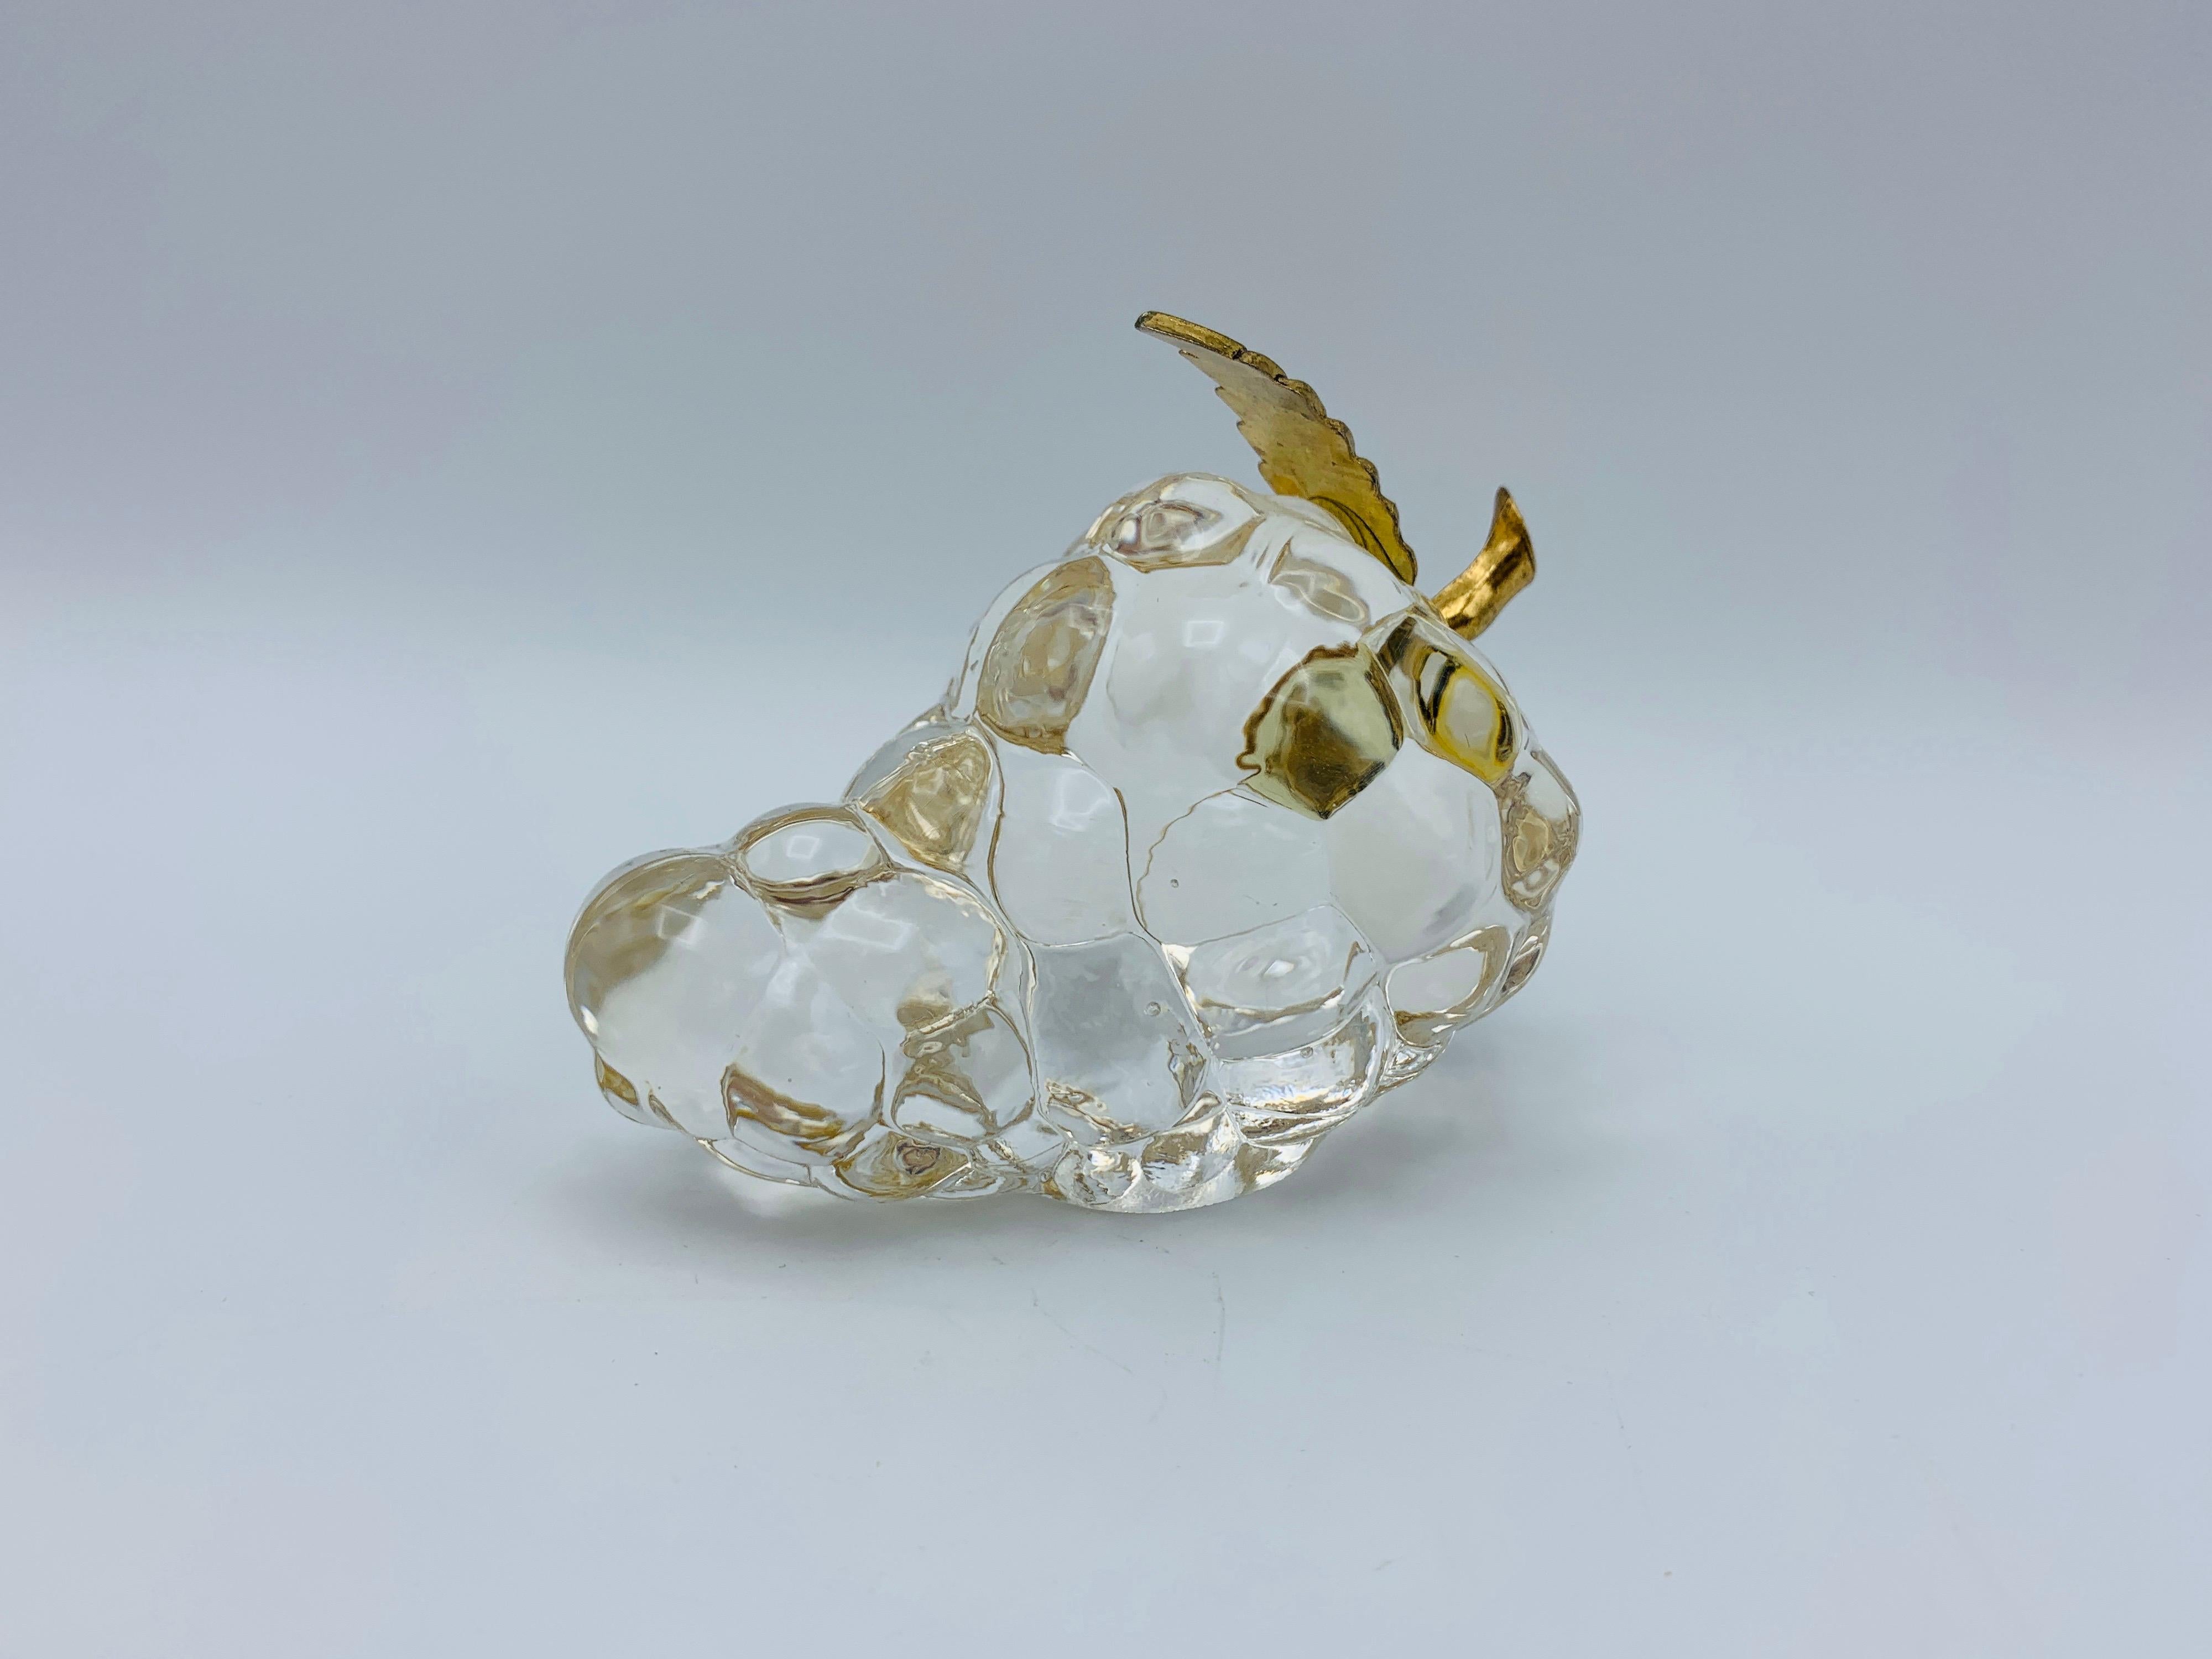 Listed is a beautiful, 1960s Italian glass grape cluster with a polished brass stem. The piece is the perfect size for a paperweight, or sculptural item on display. Heavy, weighing .7lbs.